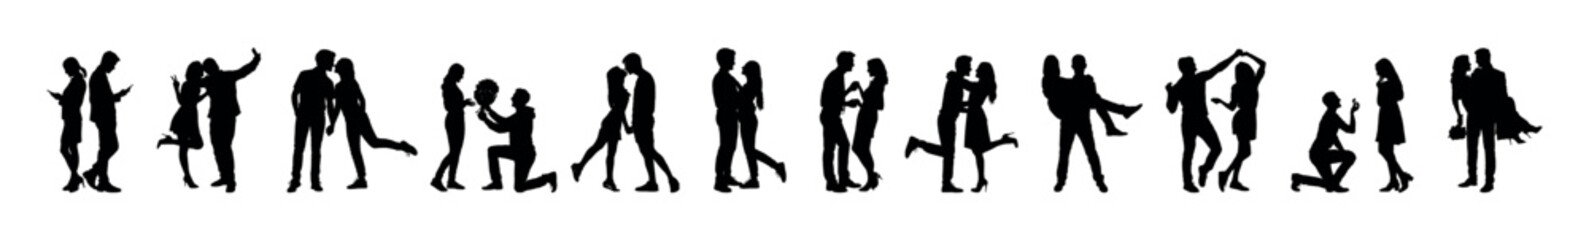 Couple falling in love posing  from dating to marriage poses in row vector silhouette set collection.